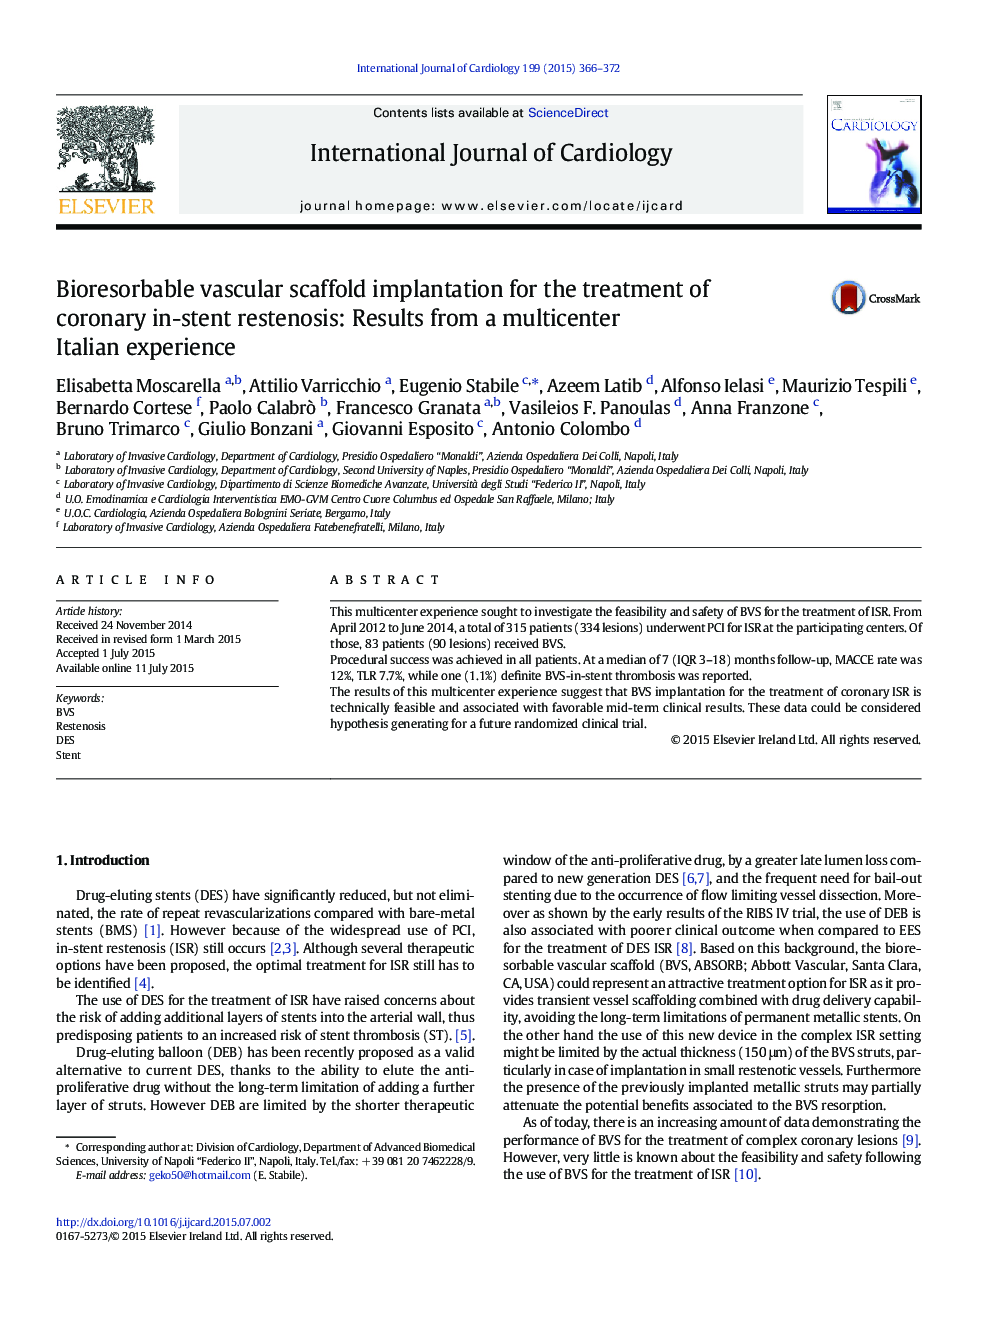 Bioresorbable vascular scaffold implantation for the treatment of coronary in-stent restenosis: Results from a multicenter Italian experience